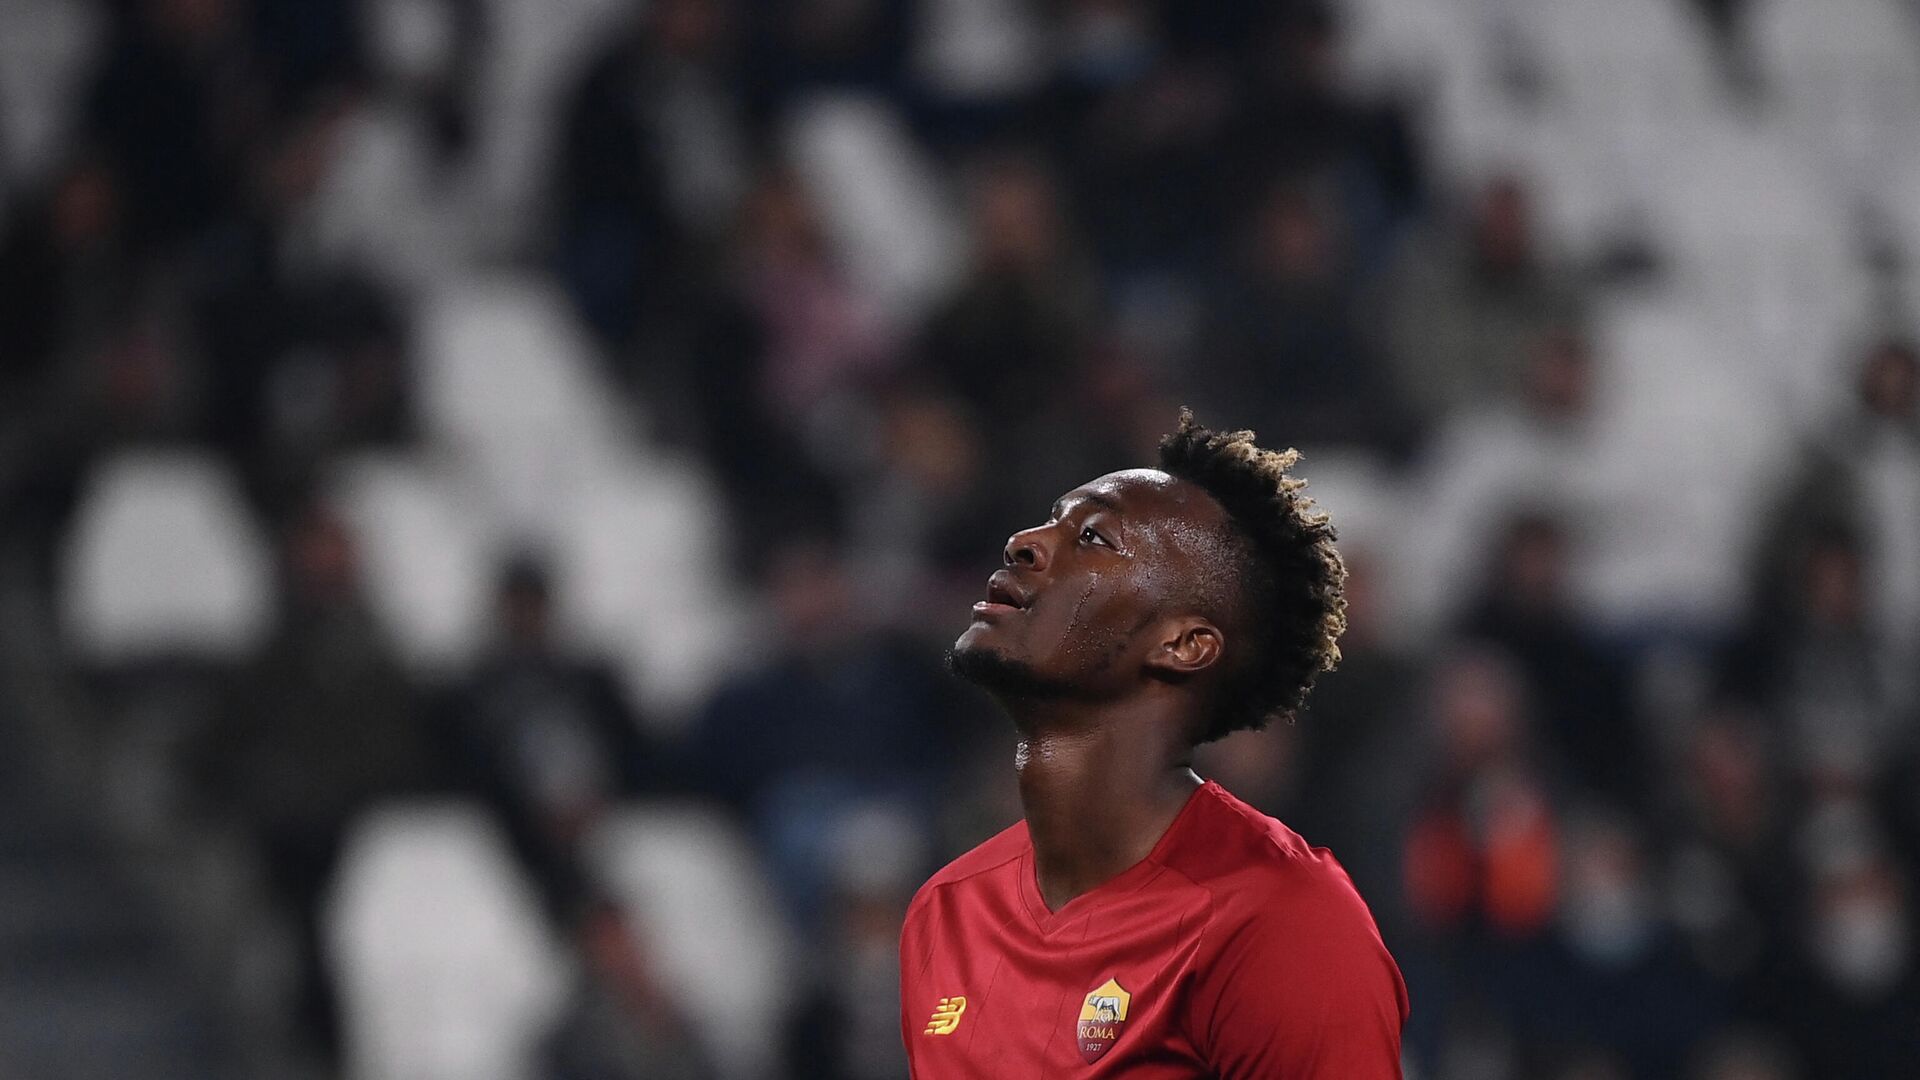 Roma's English forward Tammy Abraham reacts during the Italian Serie A football match between Juventus and AS Roma on October 17, 2021 at the Juventus stadium in Turin. (Photo by Marco BERTORELLO / AFP) - РИА Новости, 1920, 28.11.2021